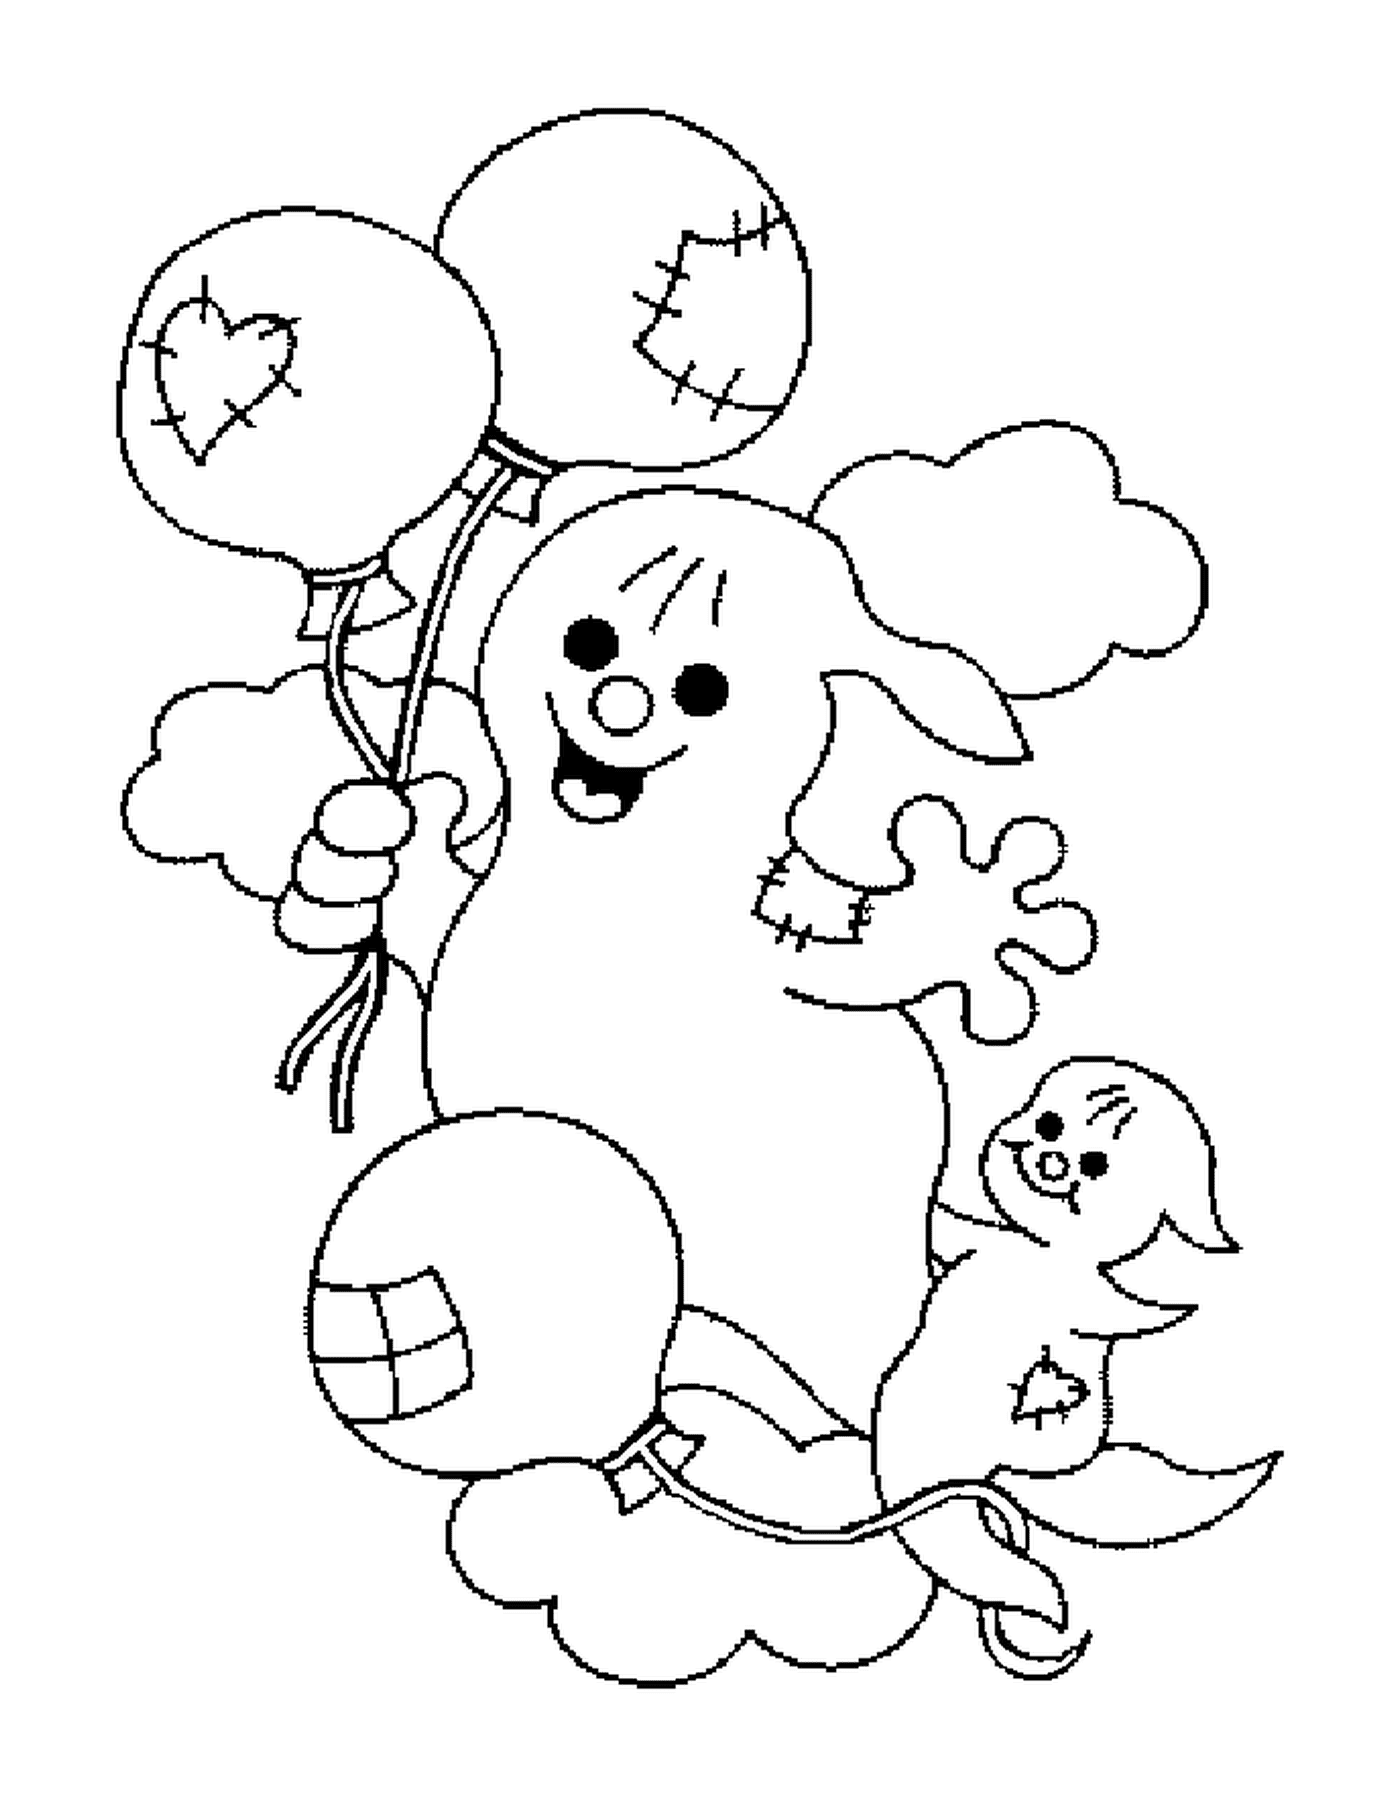  Two ghosts in the clouds with balloons 